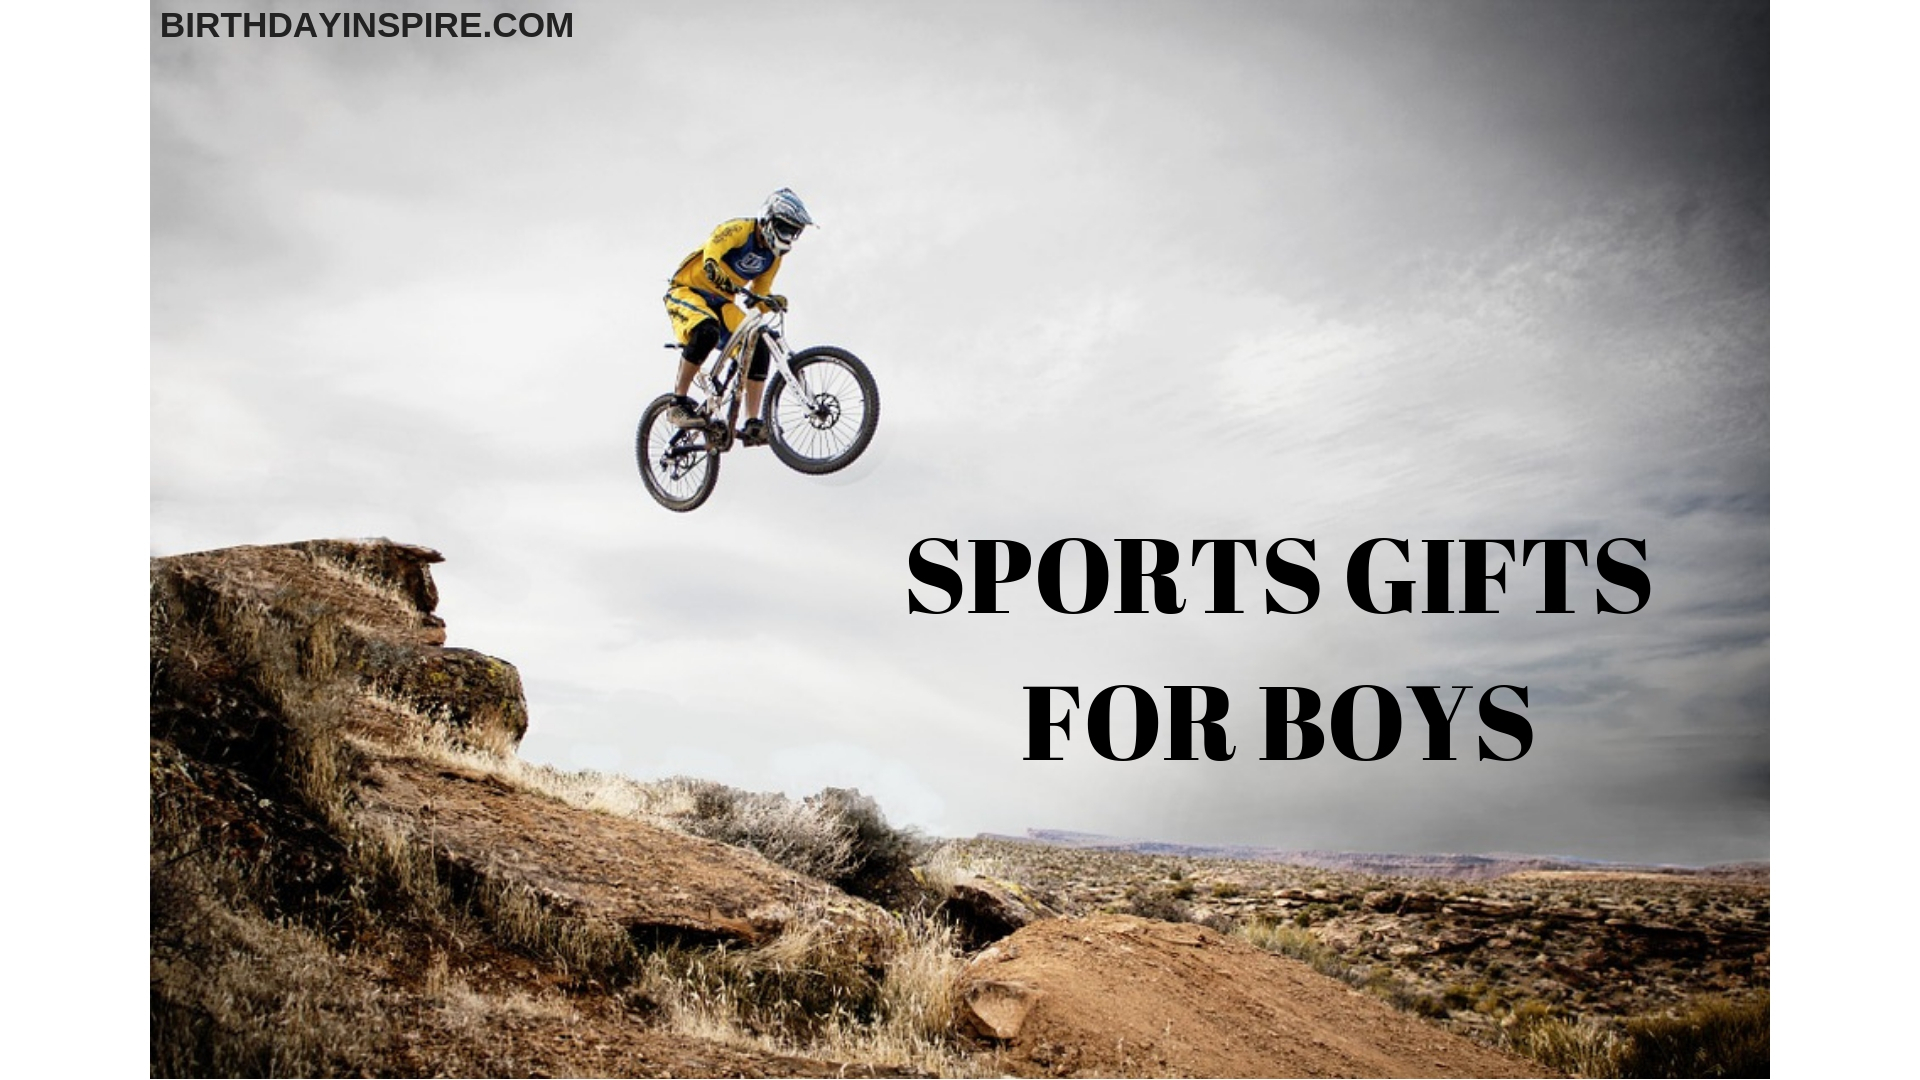 SPORTS GIFTS FOR BOYS